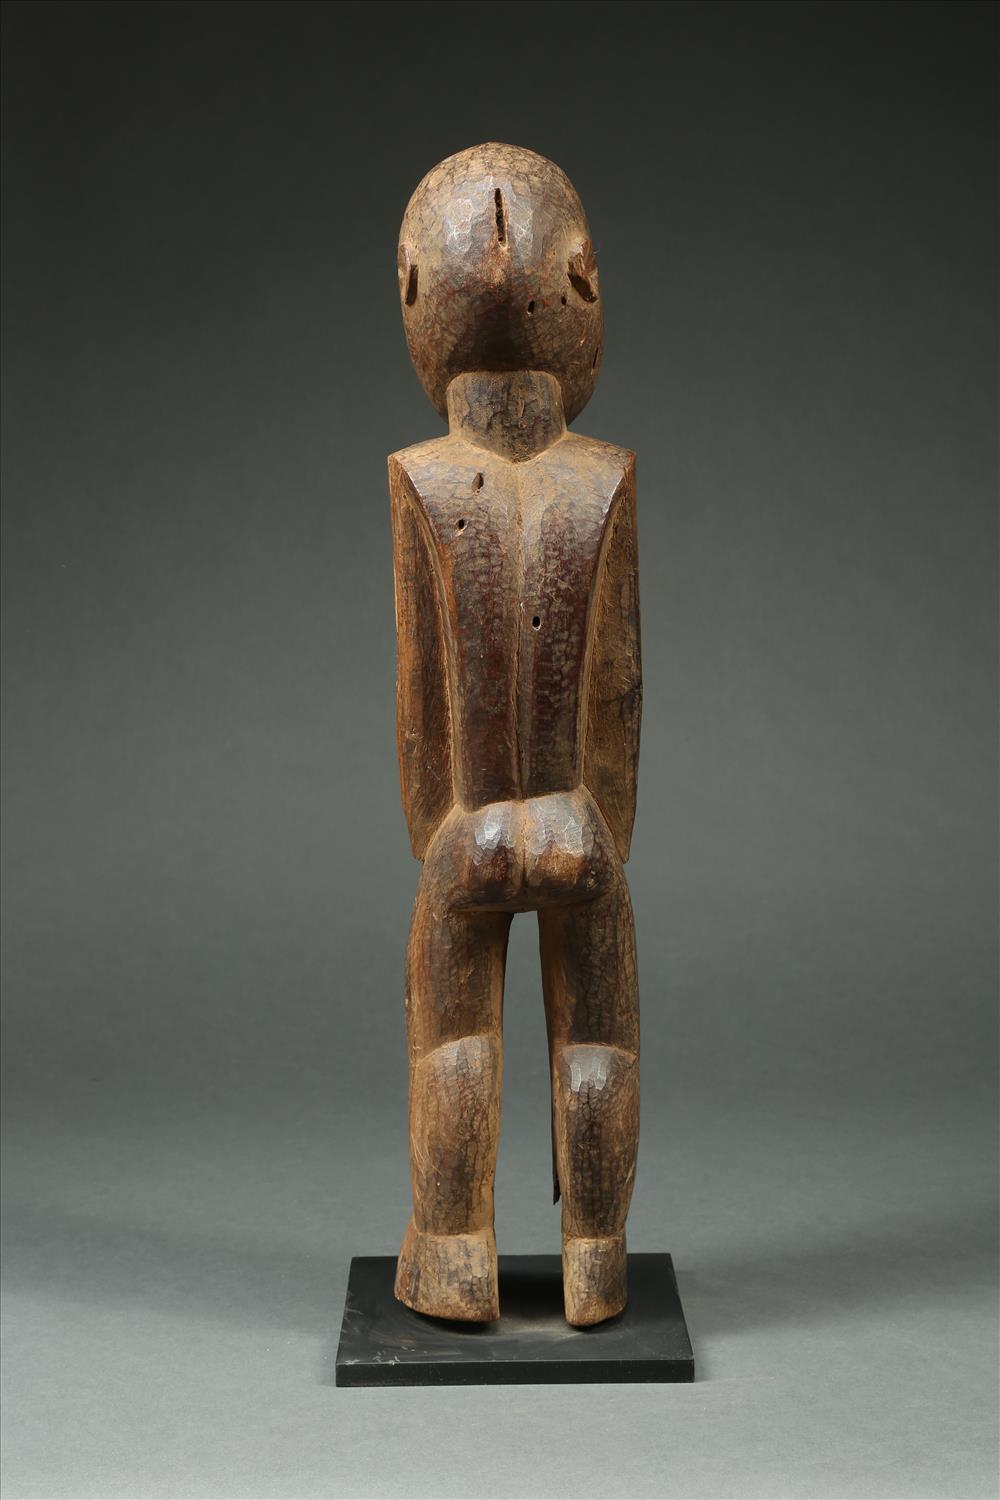 Finely carved large geometric figure from the Lobi, of Ghana and Burkina Faso, dating from the early to mid-20th century. It has a captivating gaze. Carved from very hard wood with small adze marks creating a vibrant texture. Some insect damage to